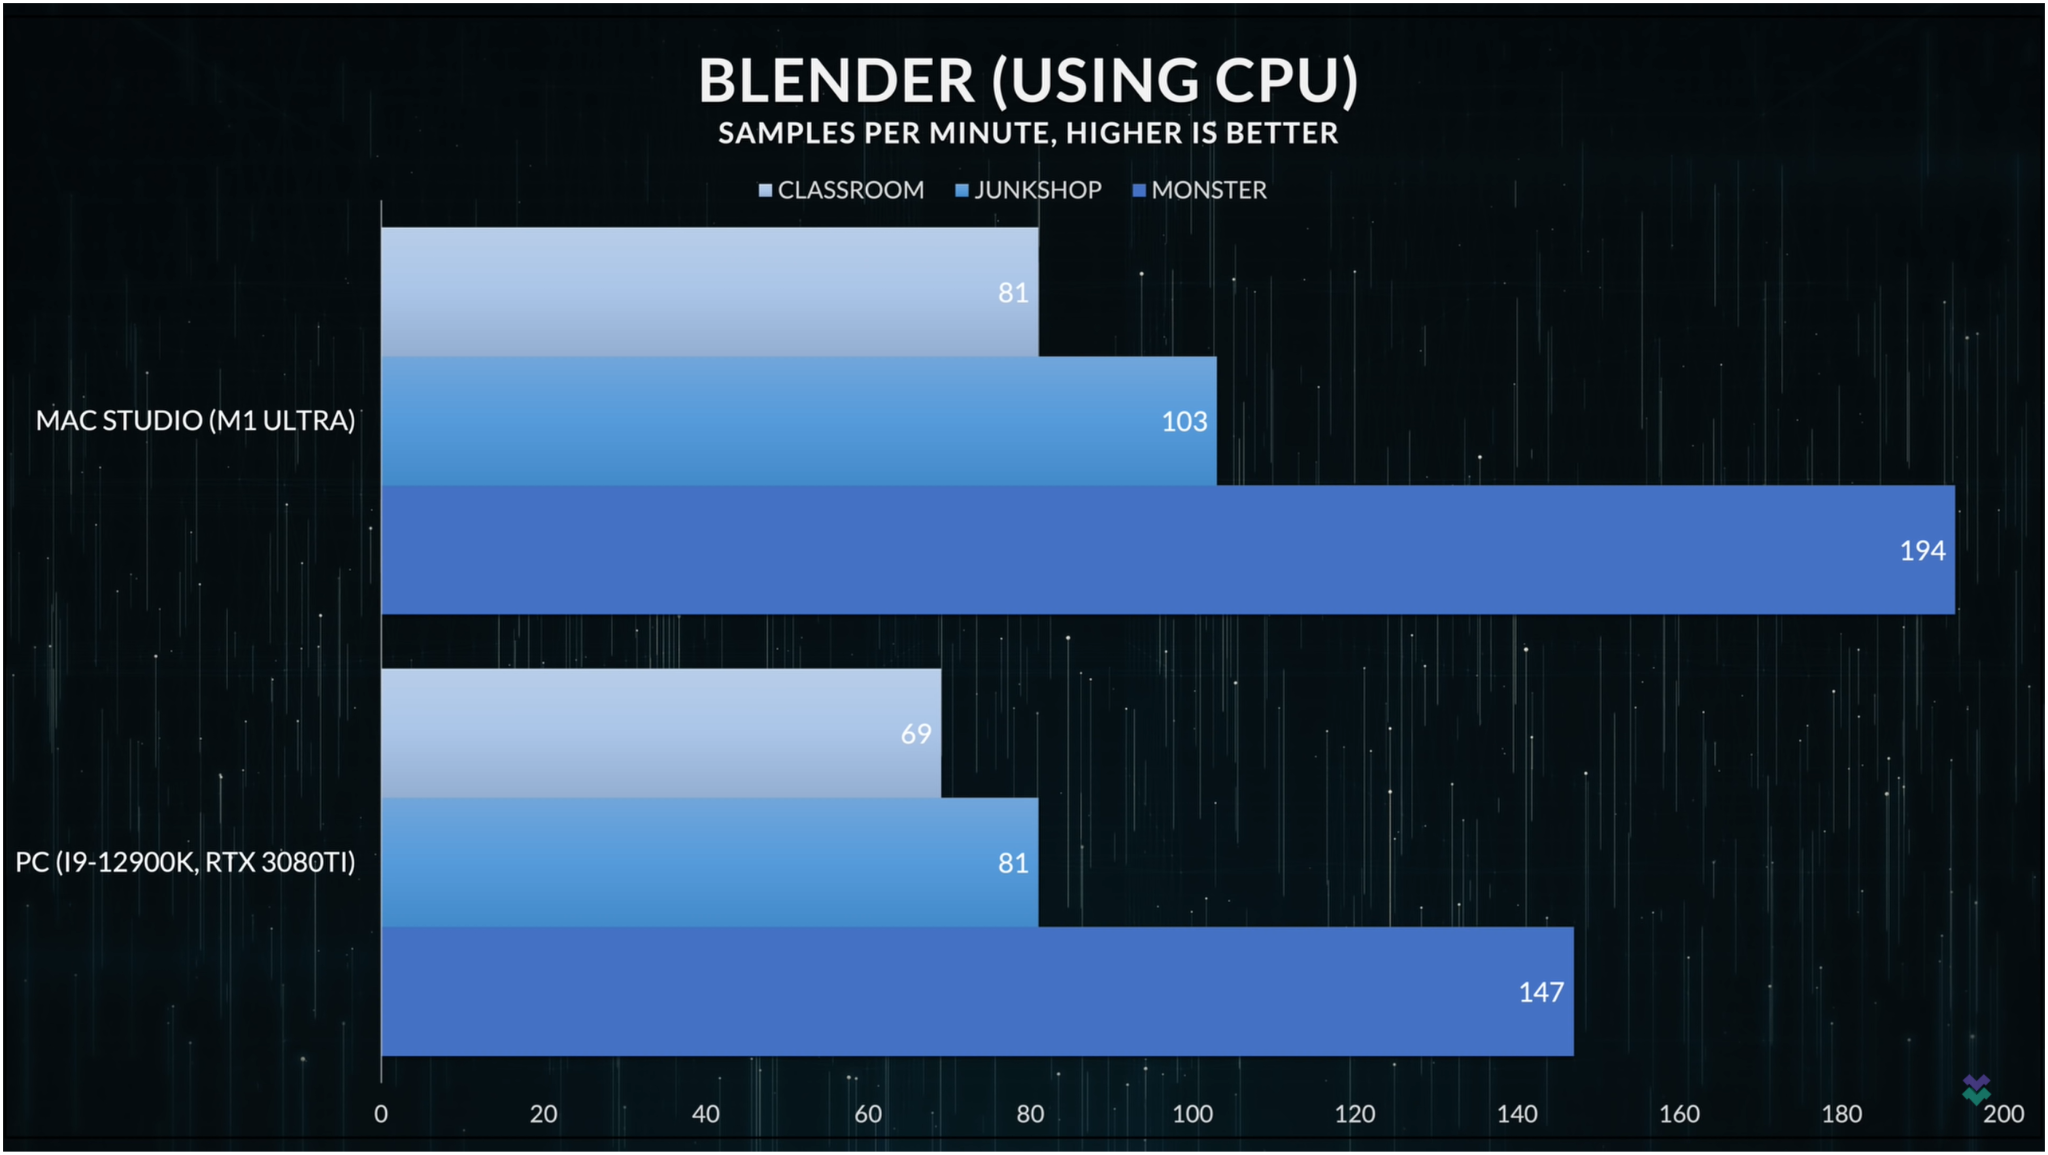 Blender (Using CPU) Benchmark for PC with Intel i9-12900K/RTX3080Ti and Mac Studio with M1 Ultra